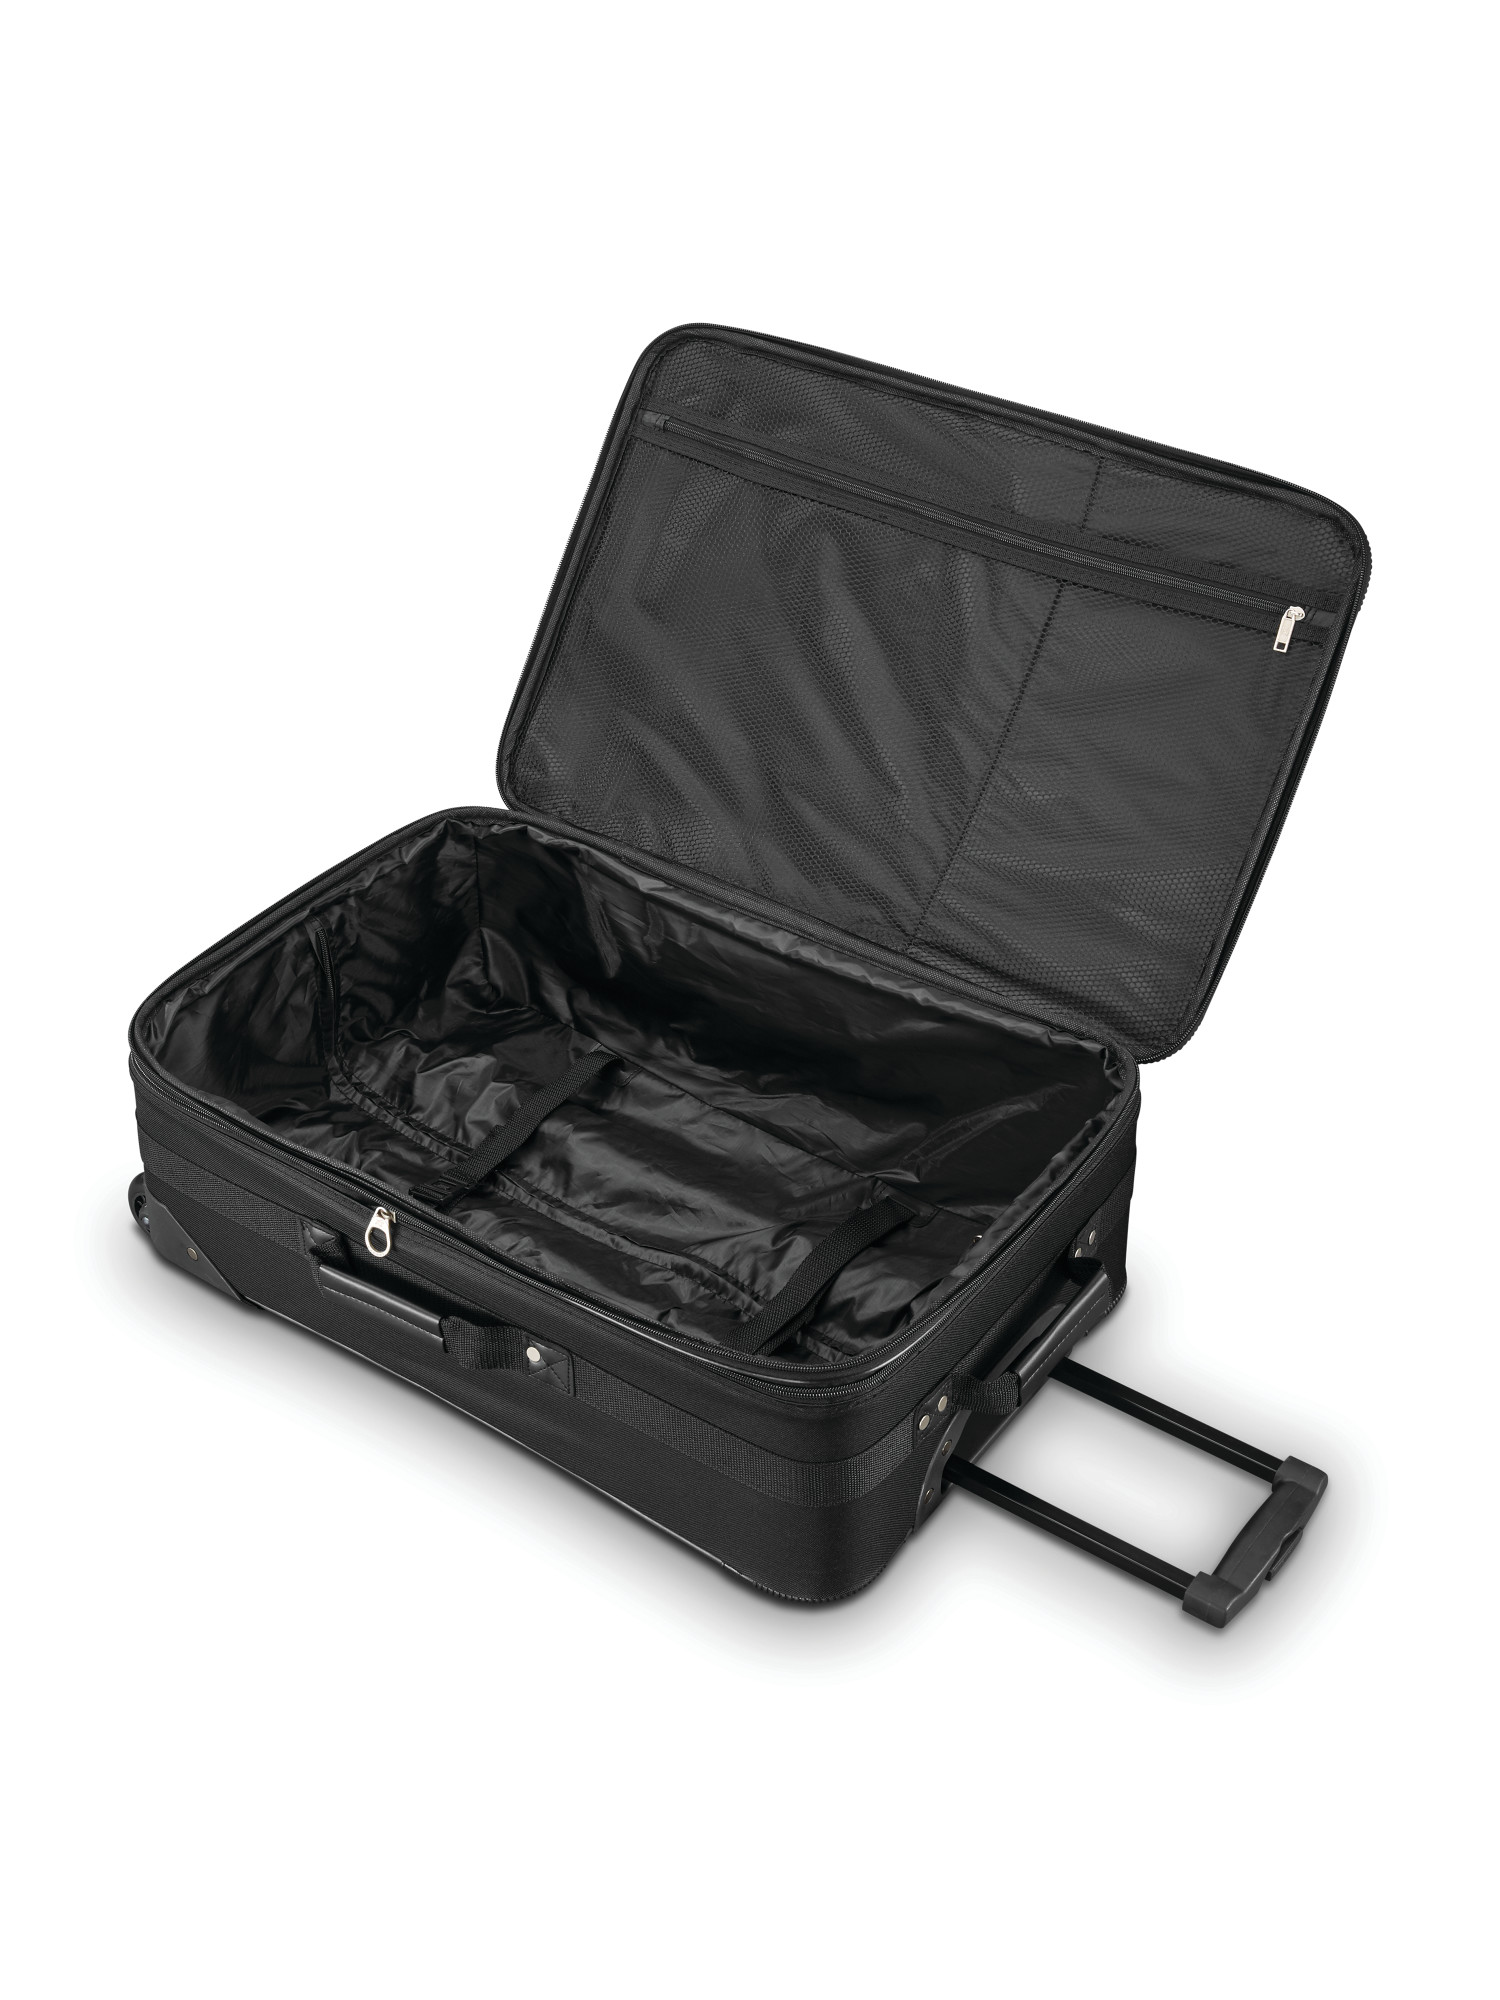 American Tourister Brewster 3 Piece Softside Luggage Set - image 9 of 9